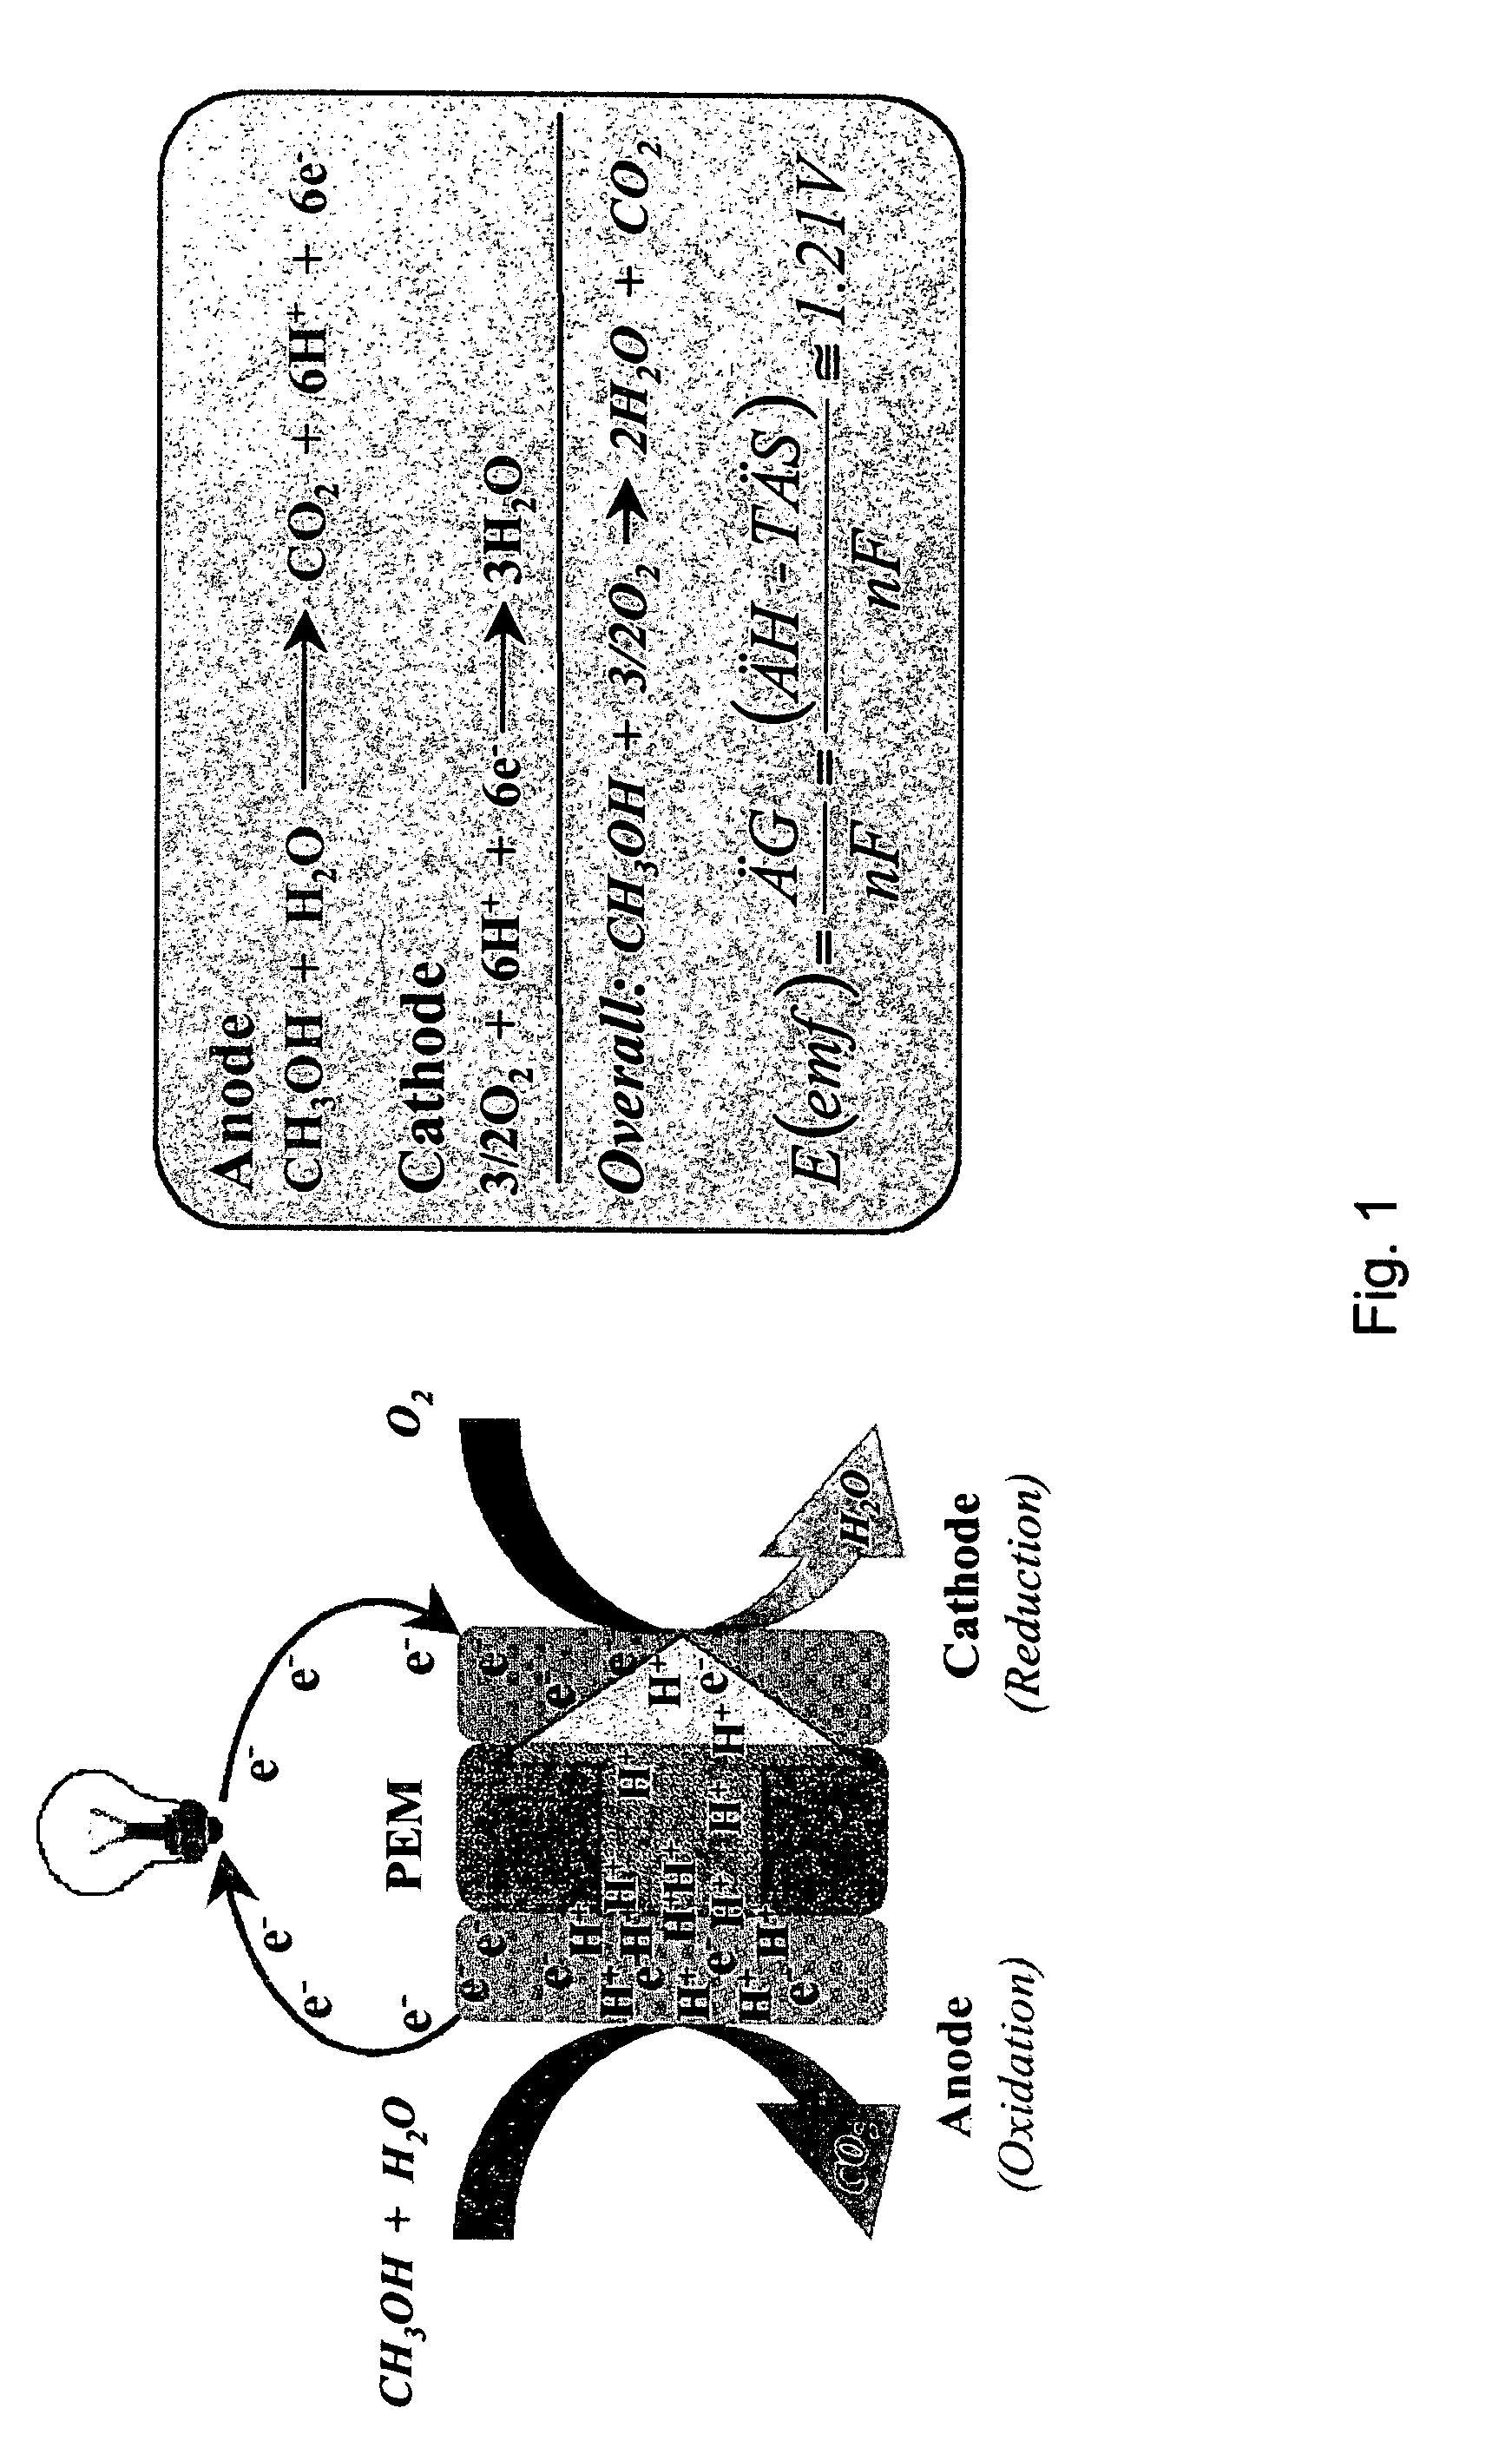 Proton exchange membrane materials for the advancement of direct methanol fuel-cell technology